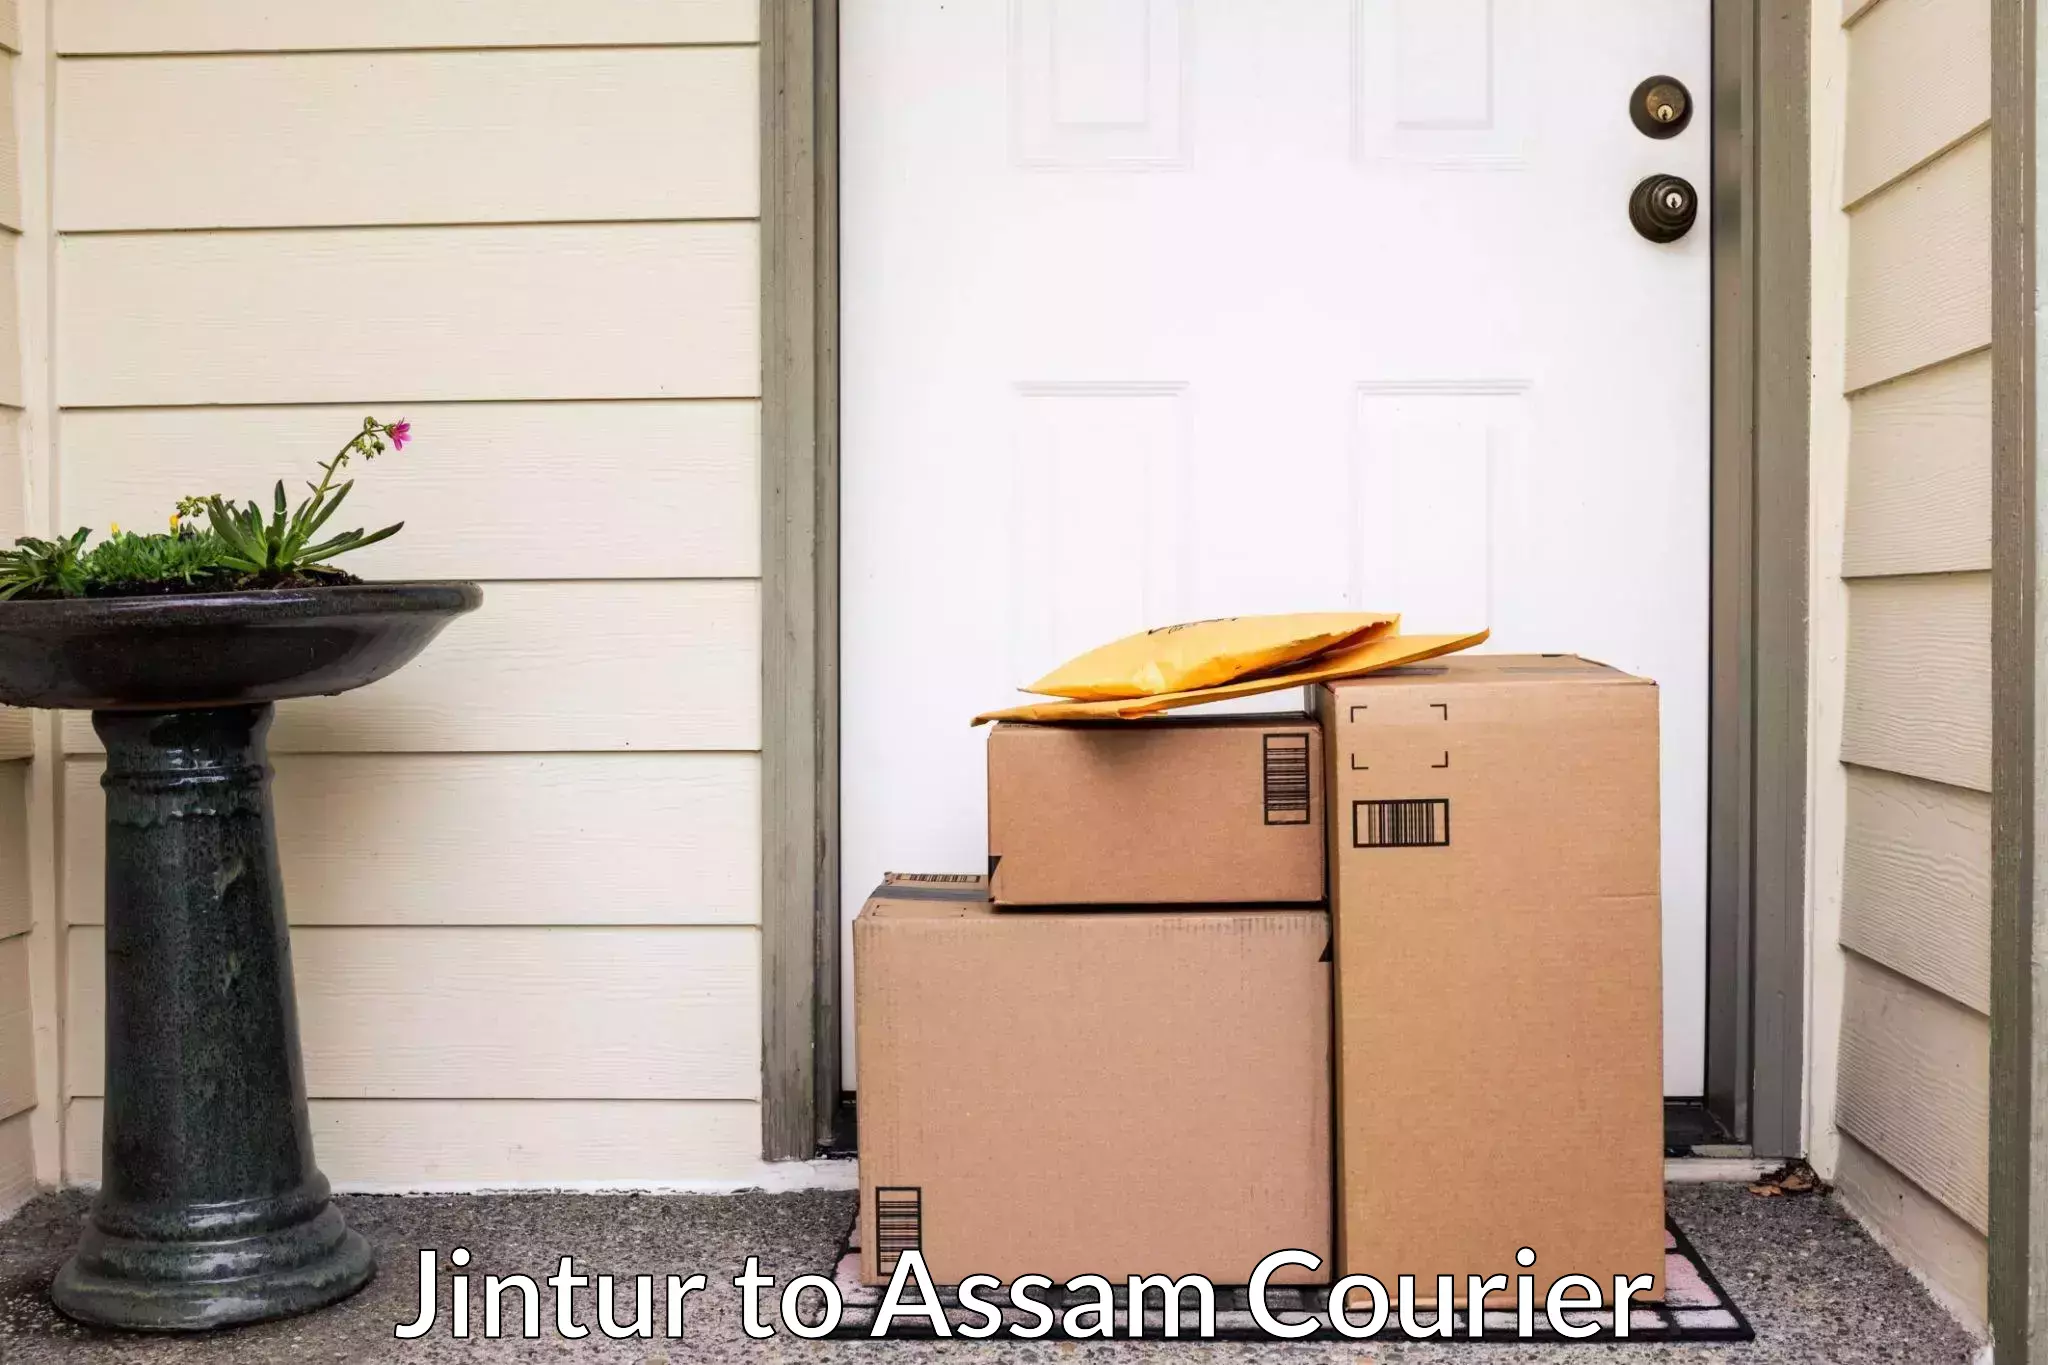 Reliable relocation services Jintur to Guwahati